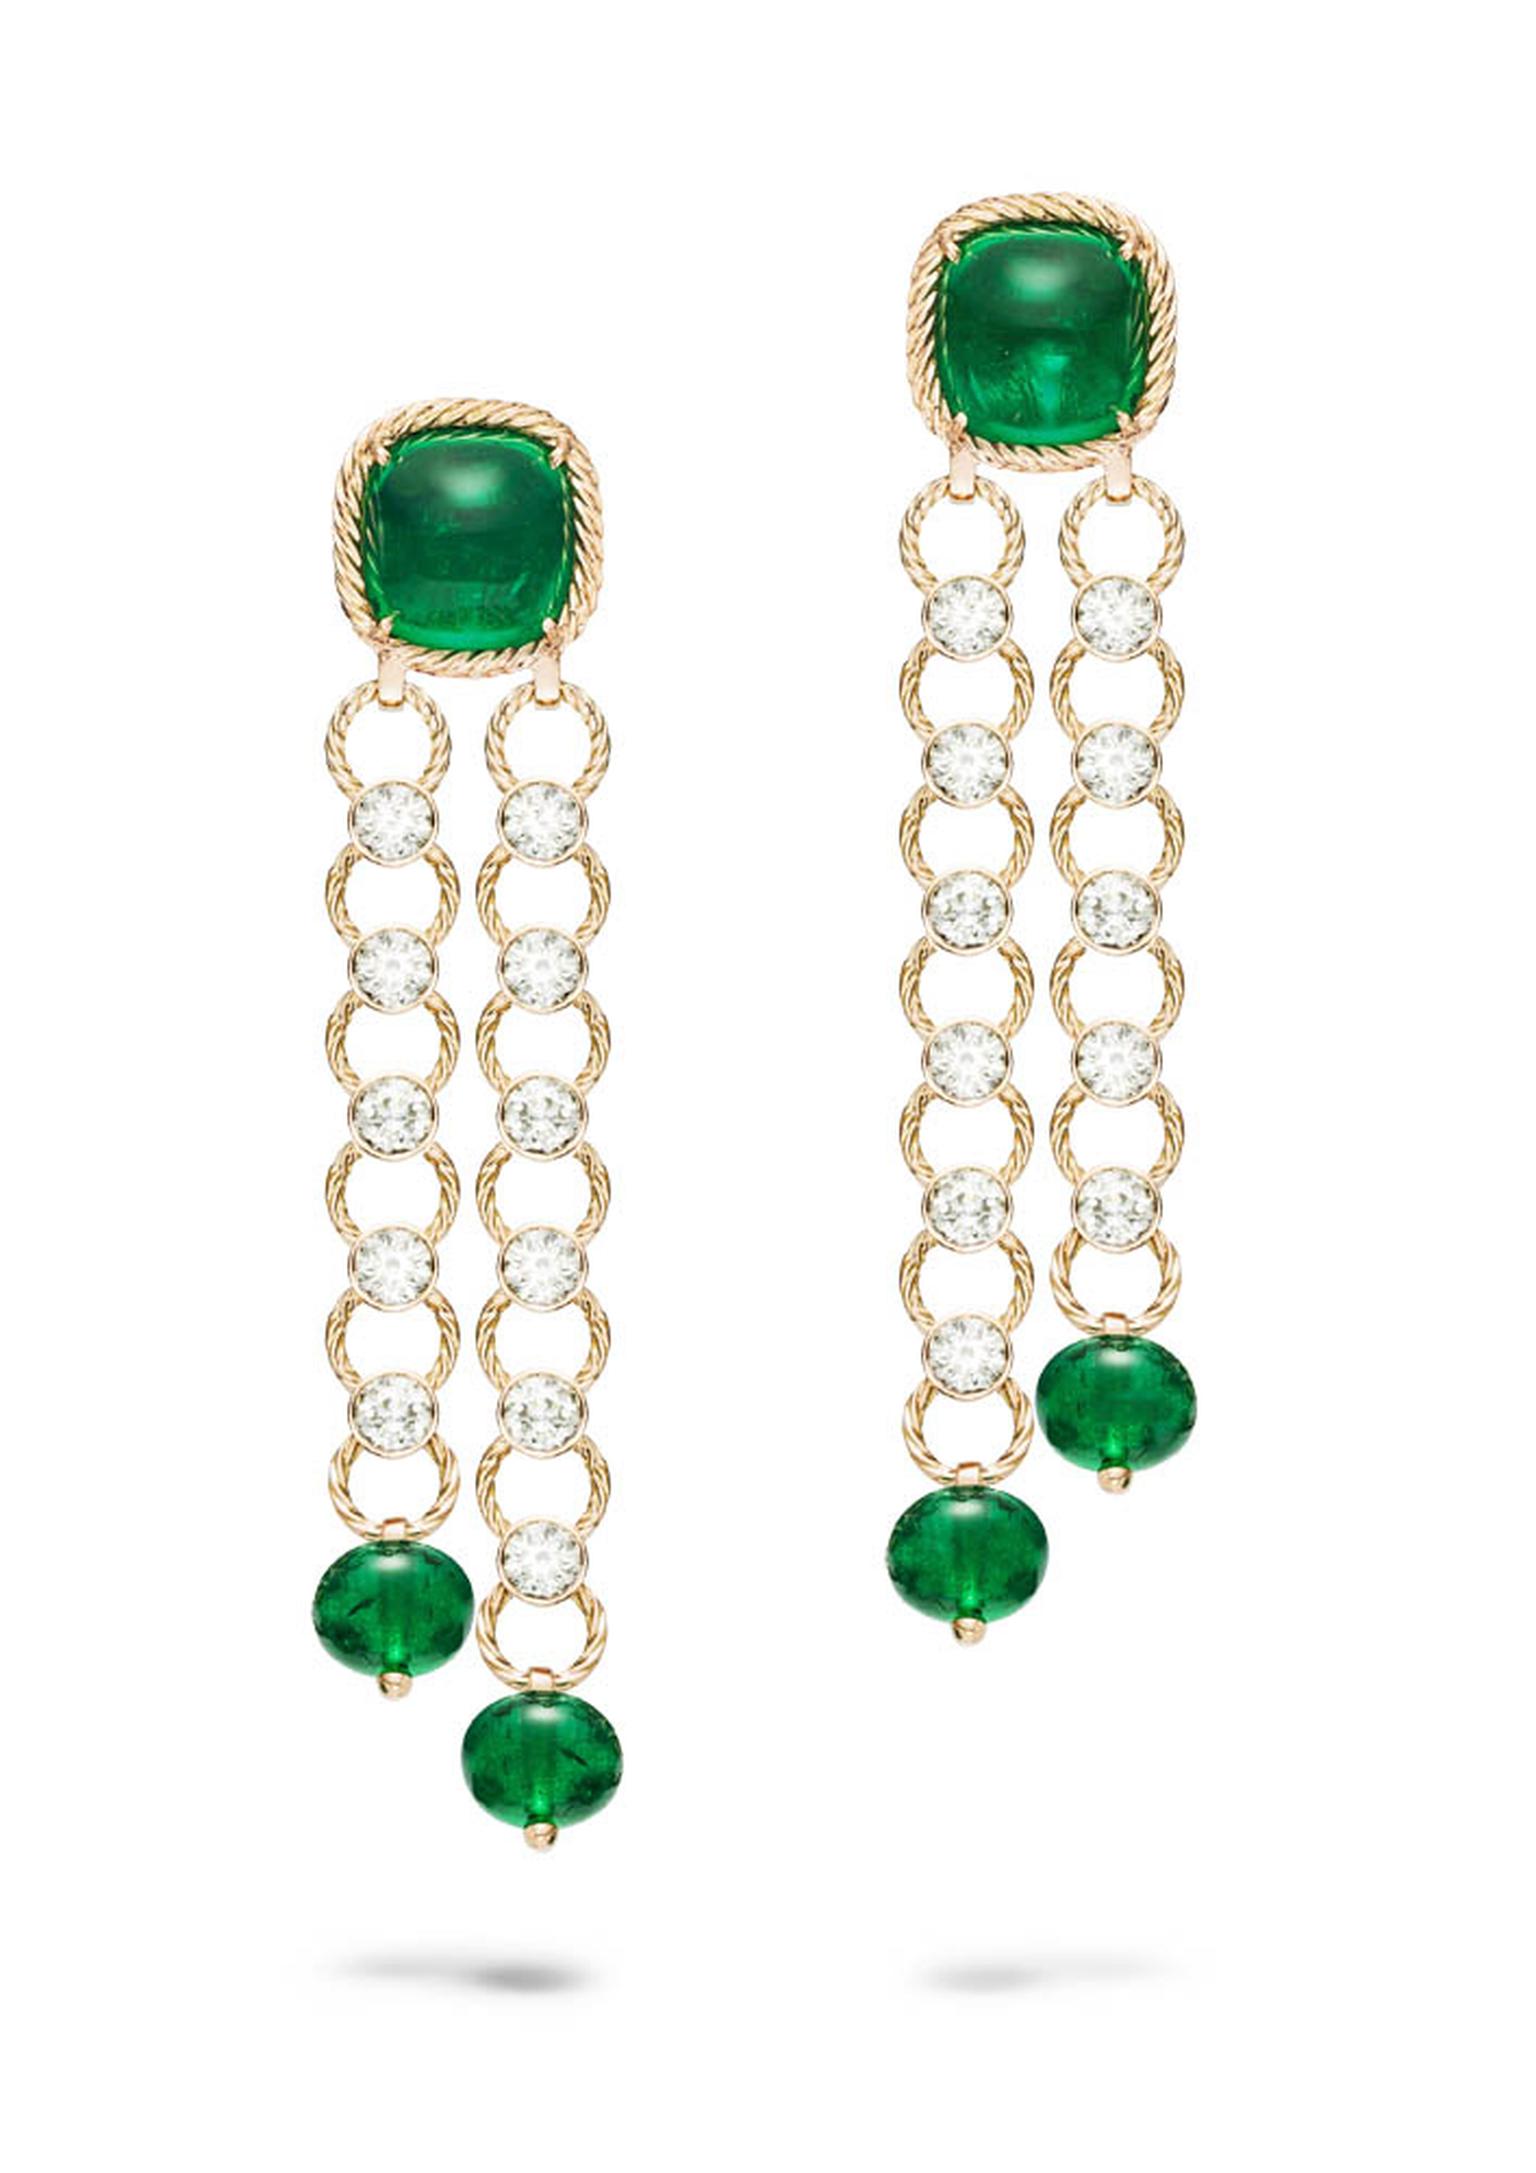 Extremely Piaget earrings in pink gold, set with sugarloaf emeralds, emerald beads and diamonds.